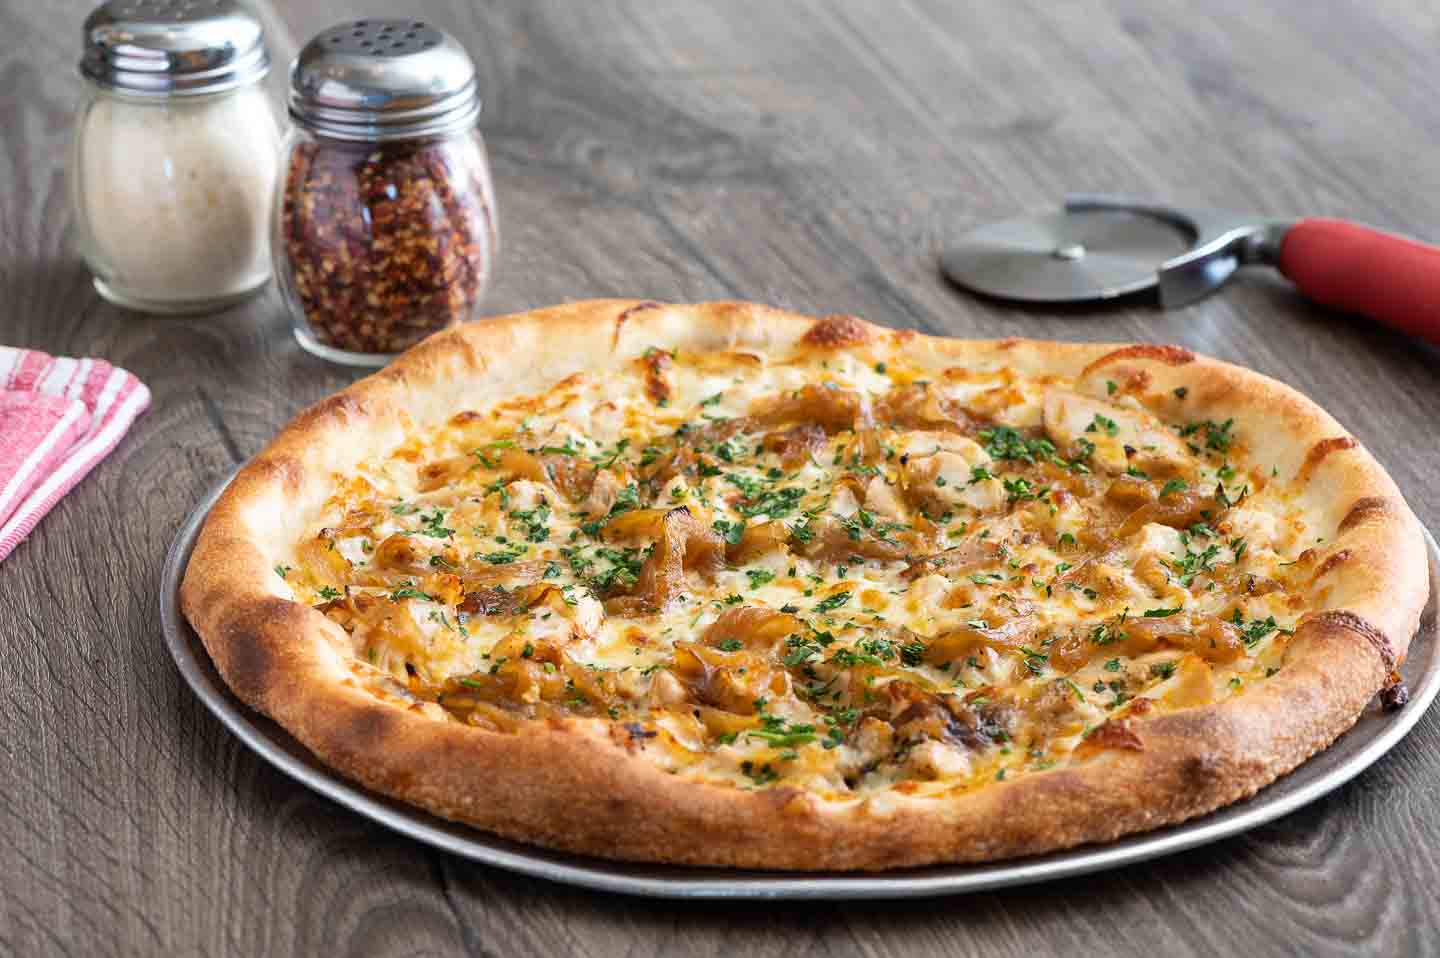 Garlic Chicken Pizza Delivery Near Me - Garlic Chicken Pizza Ingredients &  Toppings